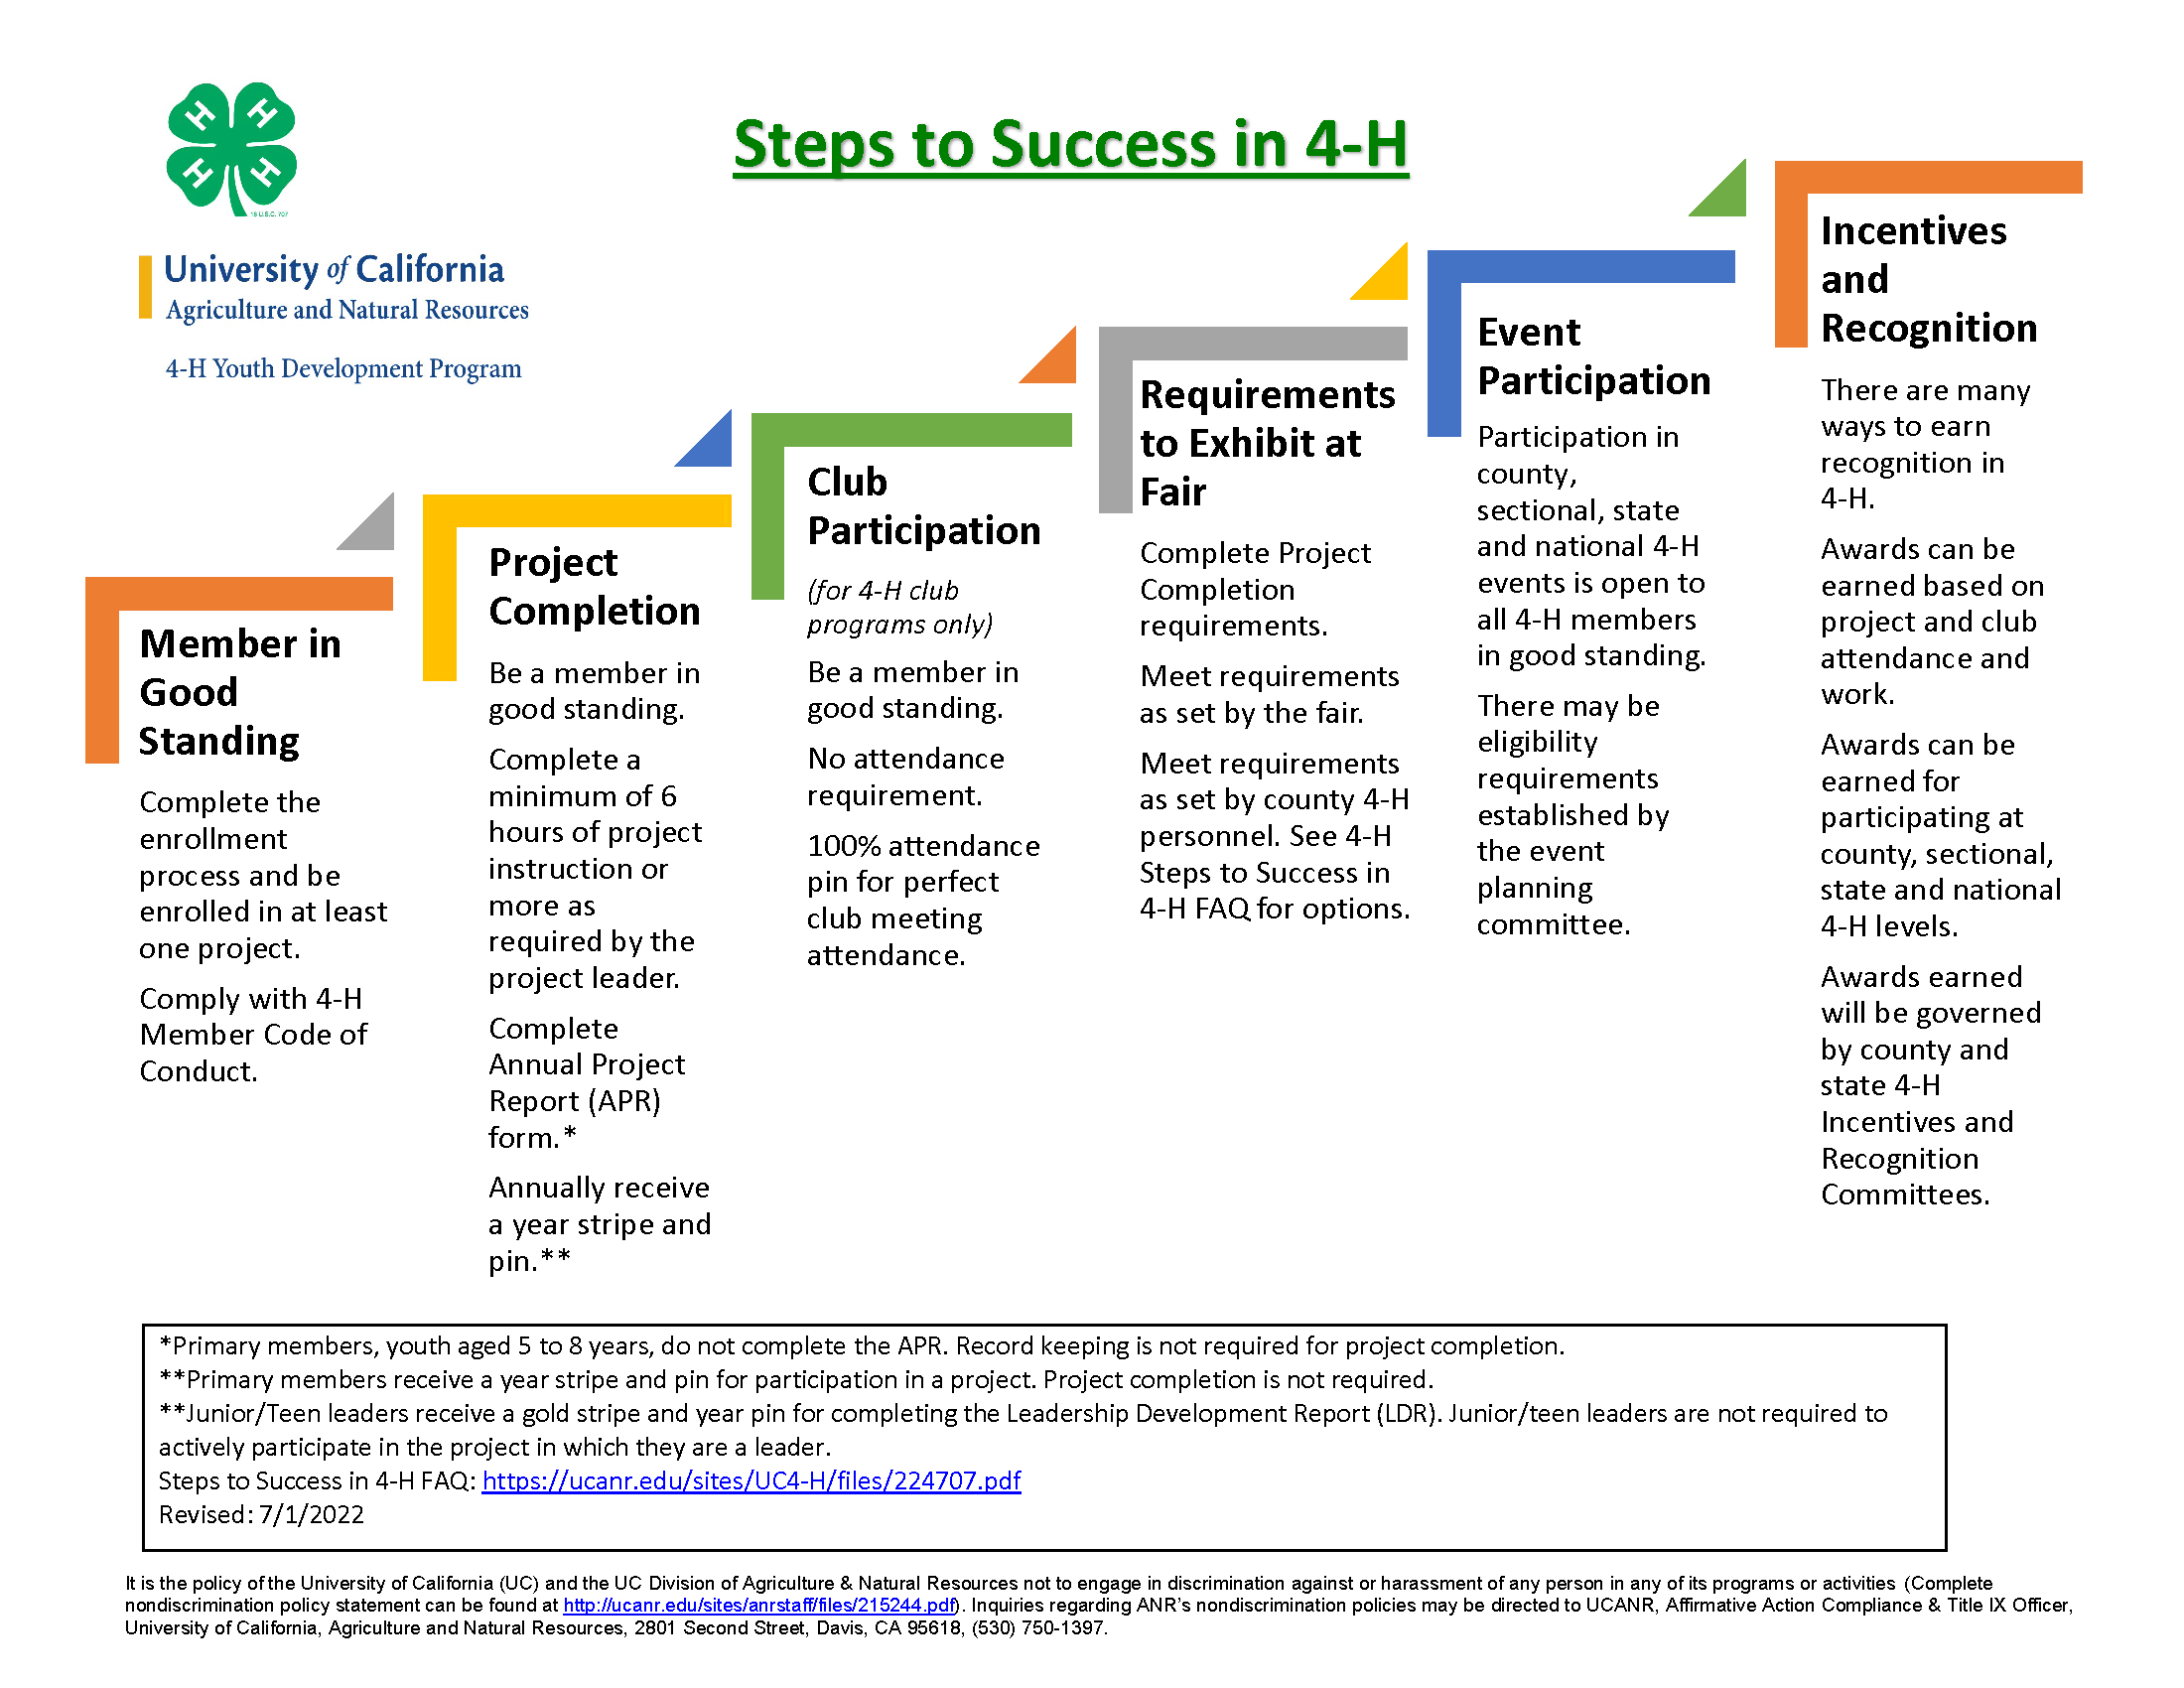 Steps to Success 2022-2023